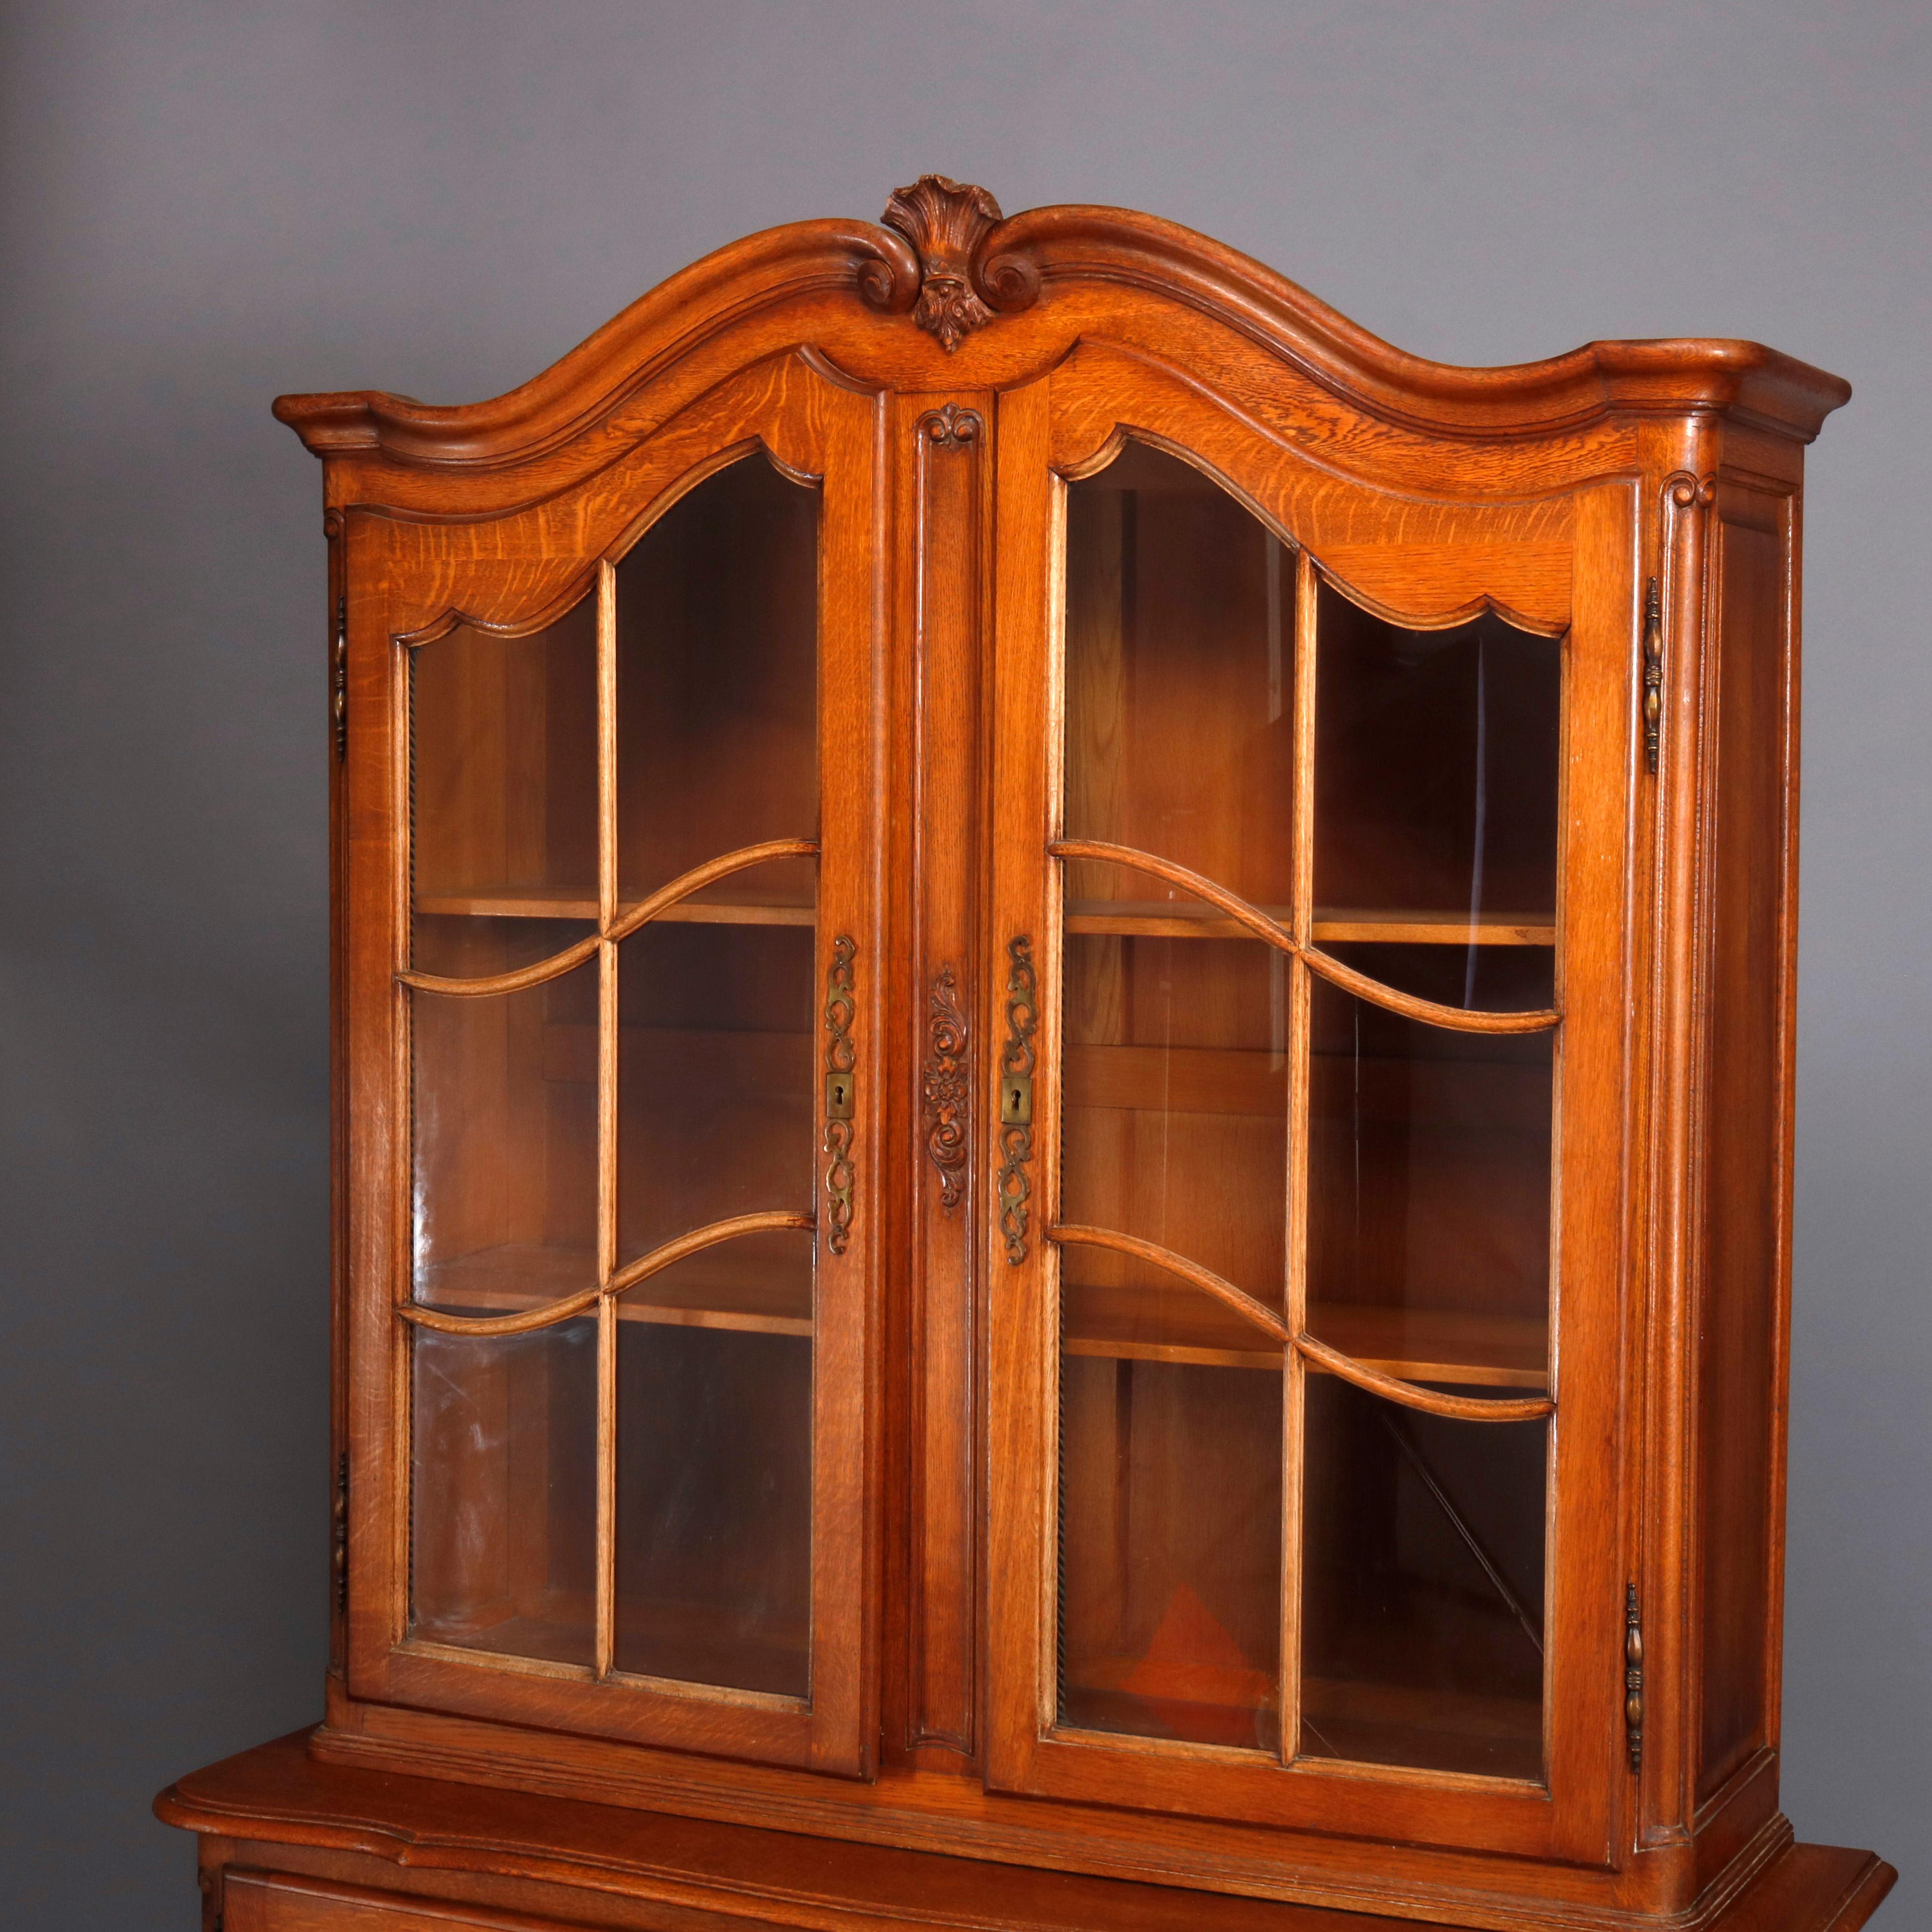 A French style breakfront cabinet offers oak construction with upper cabinet having shaped crest with central carved fleur-de-lis and flanking scrolled elements surmounting case with double glass doors opening to shelved interior, lower case with